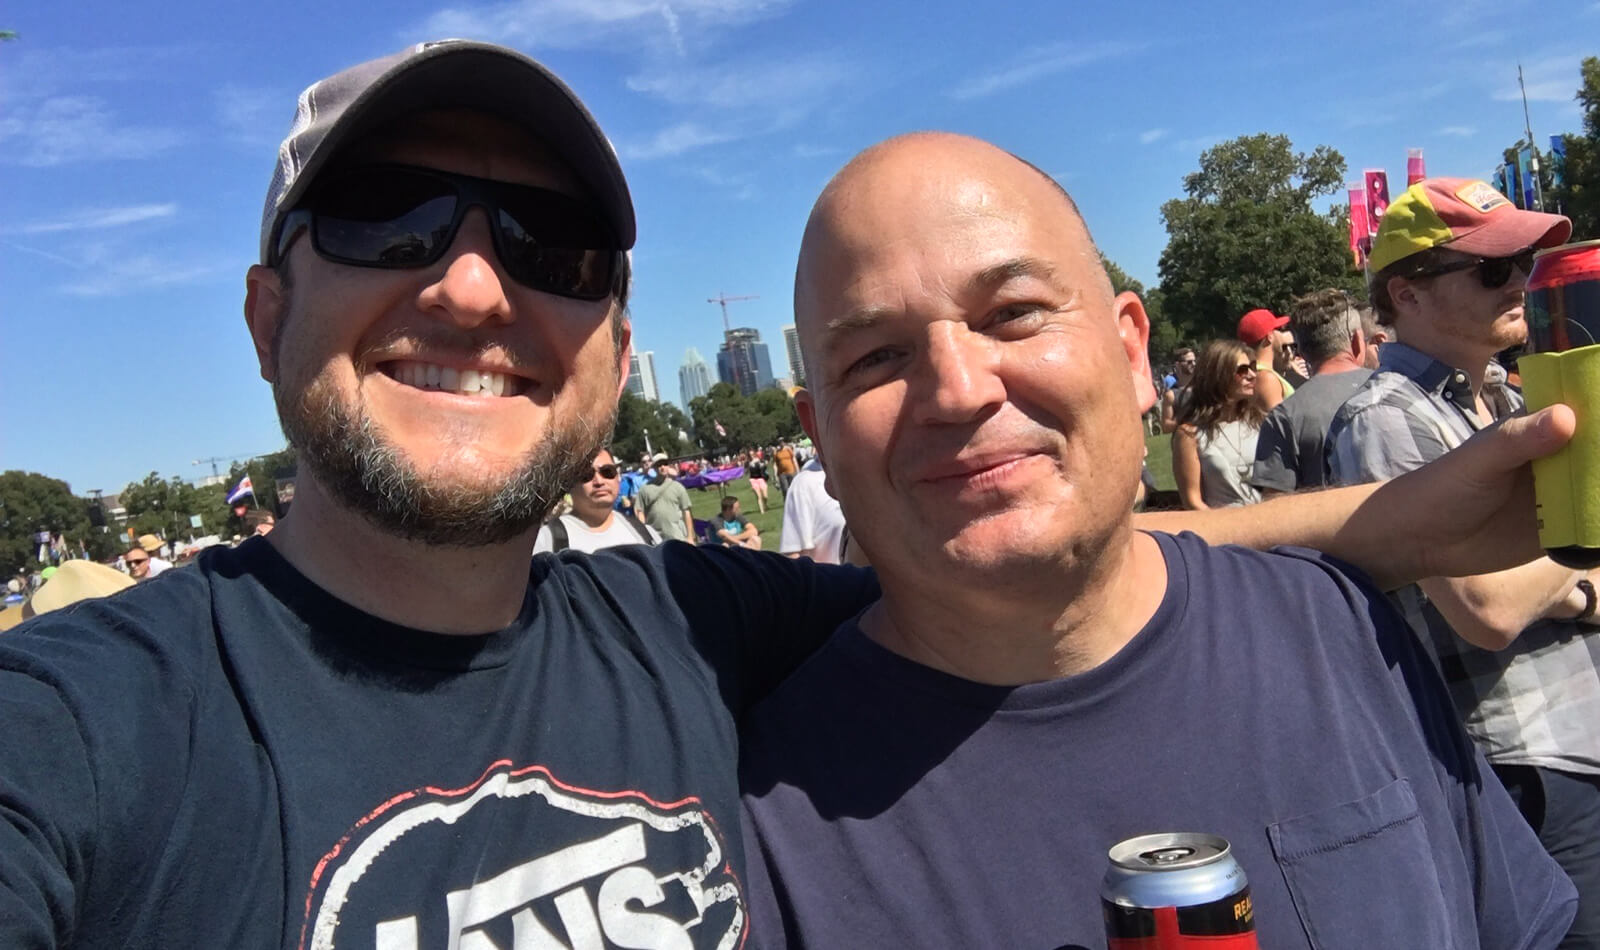 Aaron with Joe Pickerill, CMO + Co-Founder, at our yearly outing to Austin City Limits music festival. 